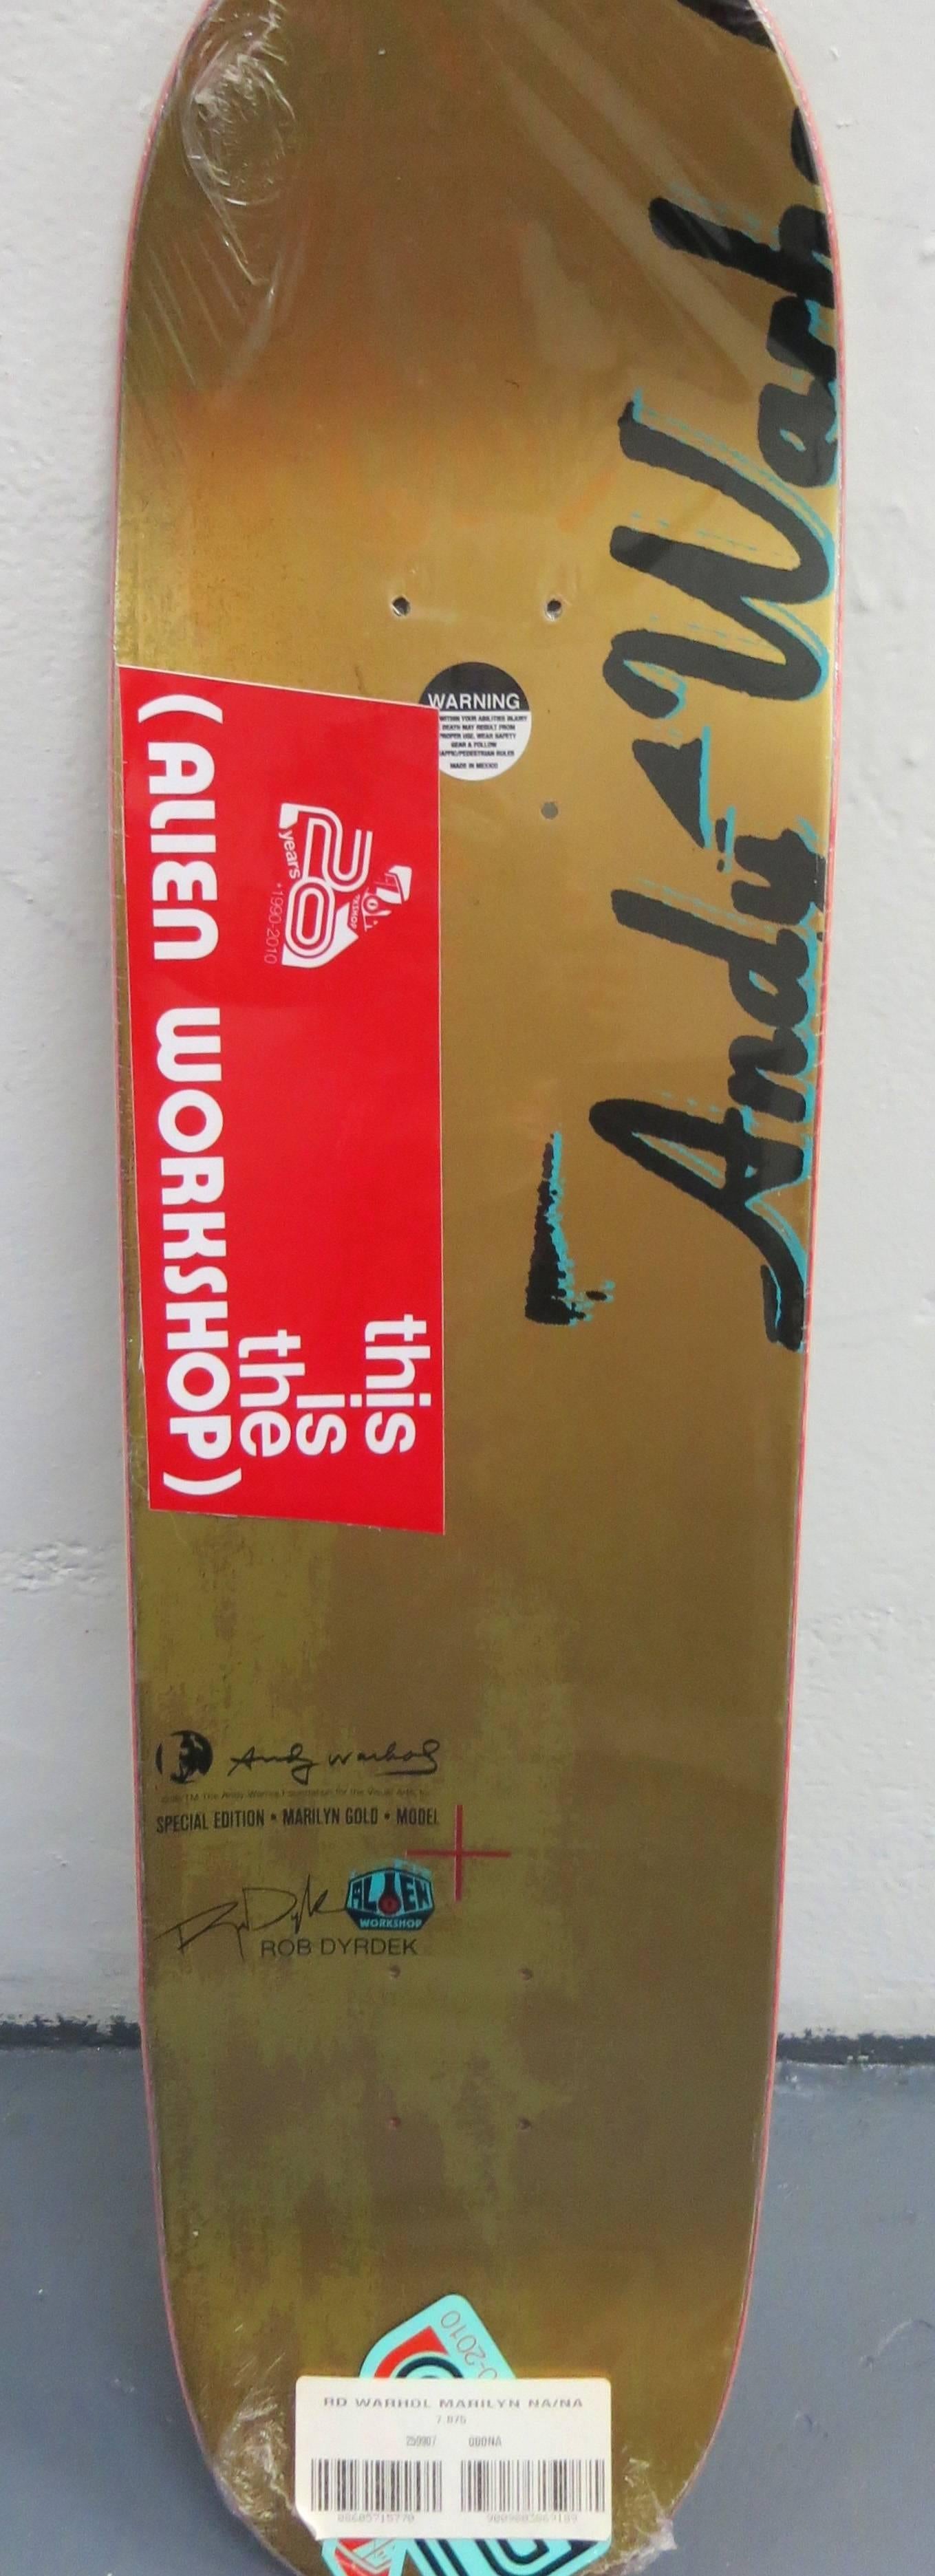 Rare Out of Print Andy Warhol Marilyn Skate Deck: New in its original packaging. Perhaps the most sought after of all Warhol decks.

This work originated circa 2010 as a result of the collaboration between Alien Workshop and the Andy Warhol